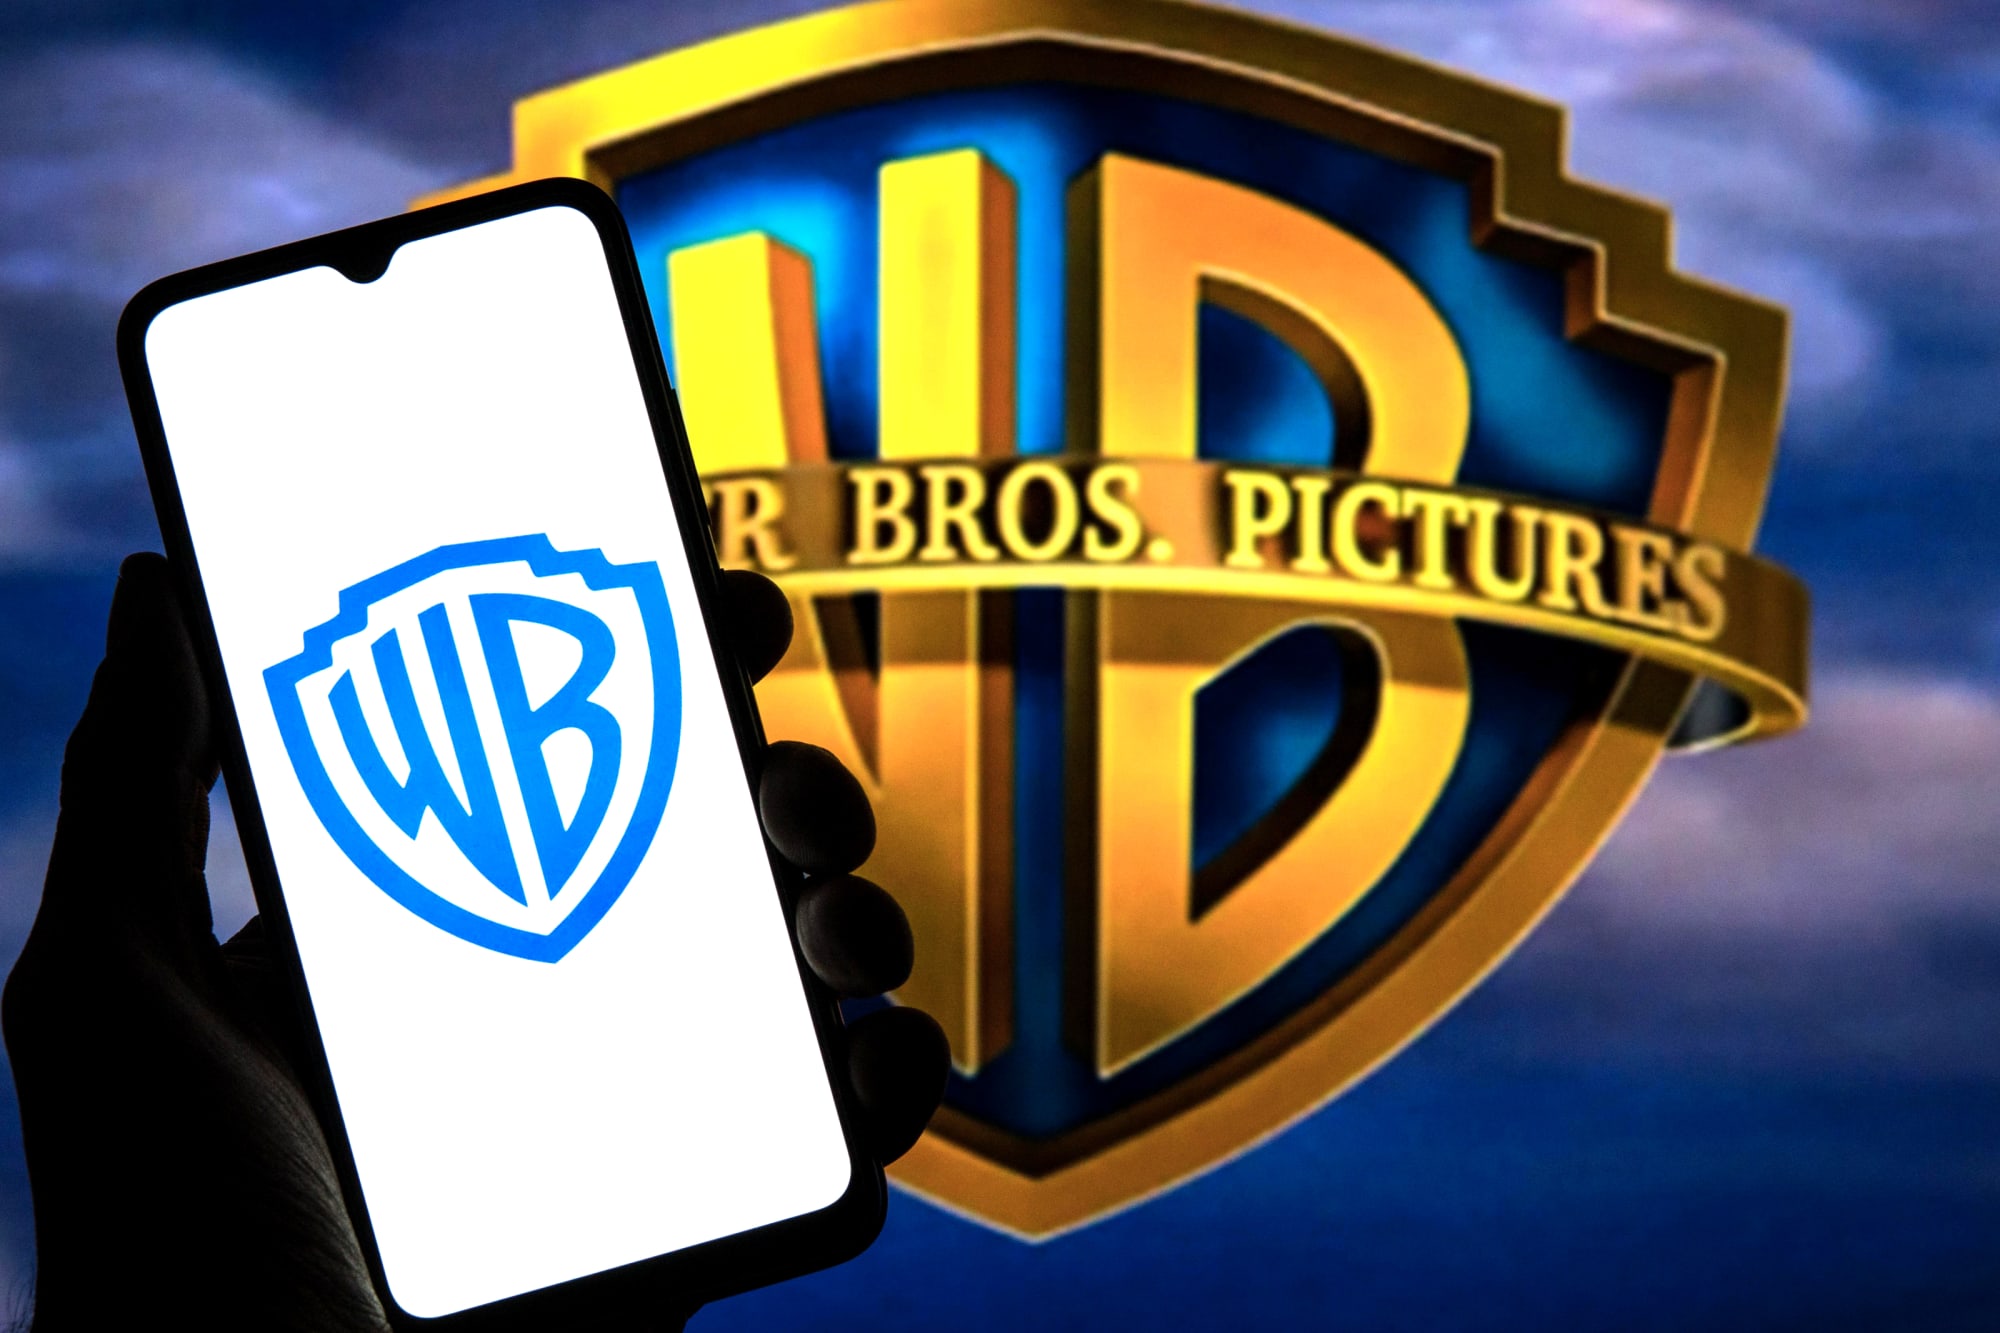 Warner Bros ComicCon 2022 schedule DC SDCC panel start time where you